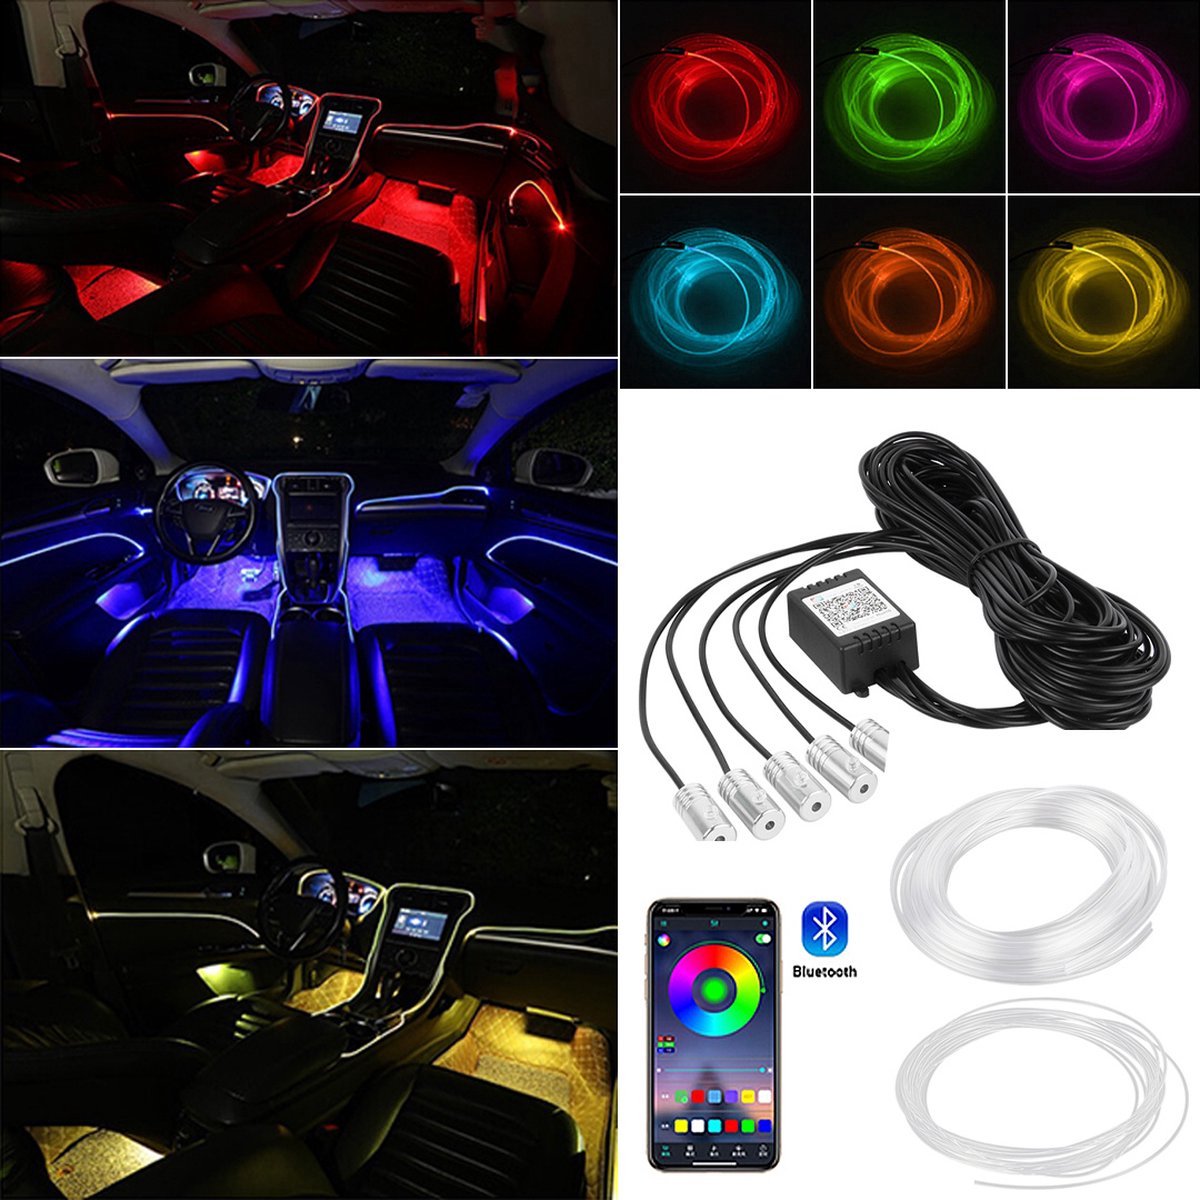 Forever Speed Auto Interieur Verlichting - Led Strip Auto – 6M – Met App – Led Auto Interieur Verlichting - Power Switch